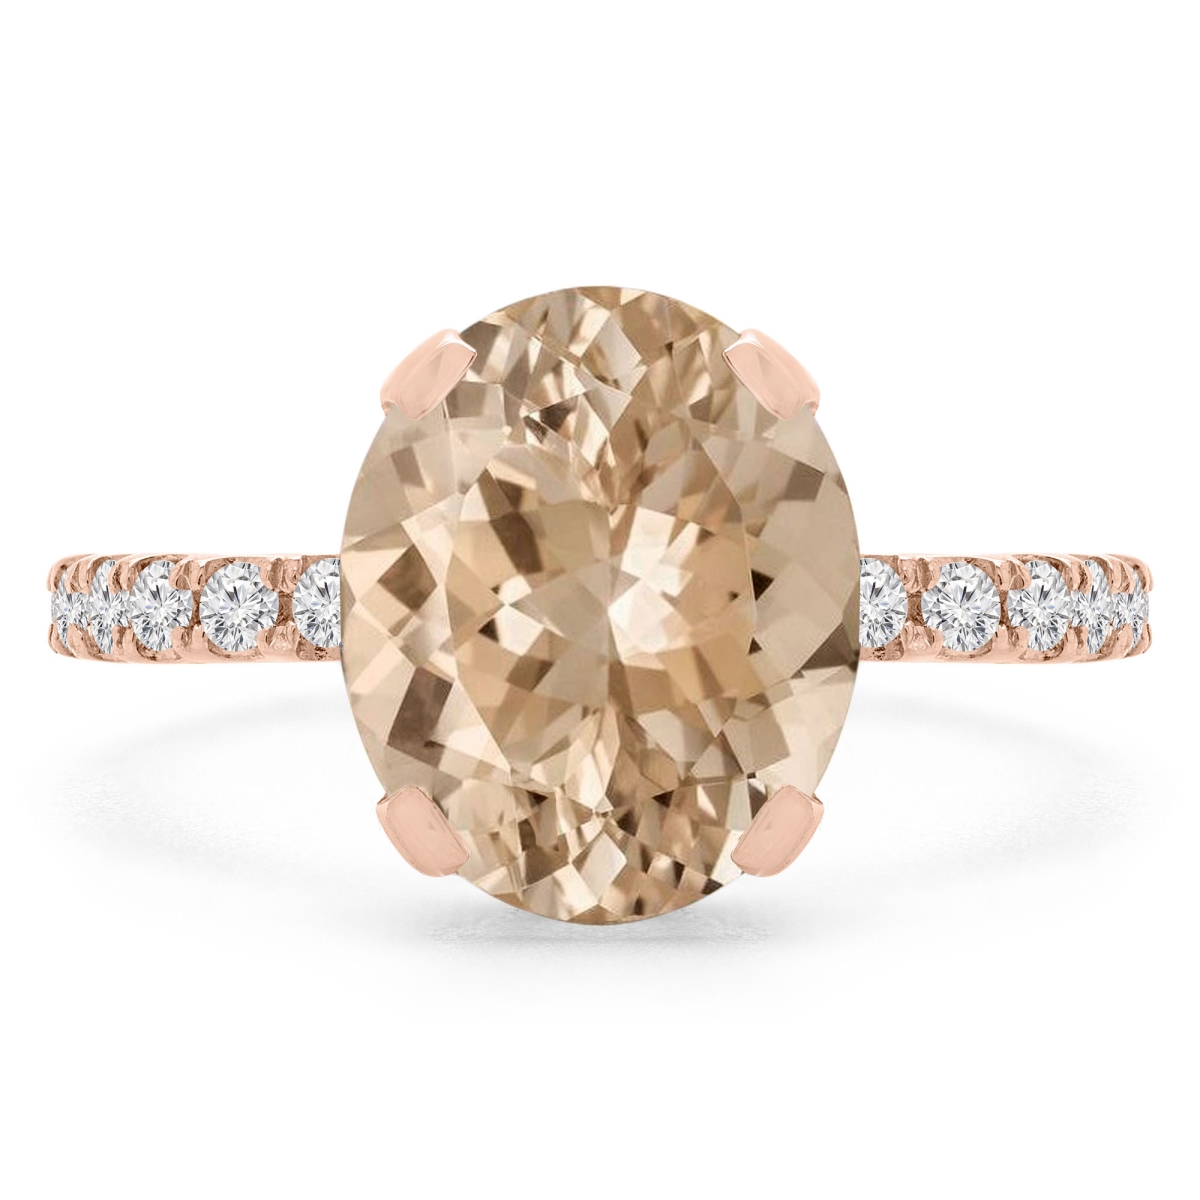 Picture of Majesty Diamonds MD190407-9 3.4 CTW Oval Pink Morganite Under Halo Engagement Ring in 14K Rose Gold - Size 9